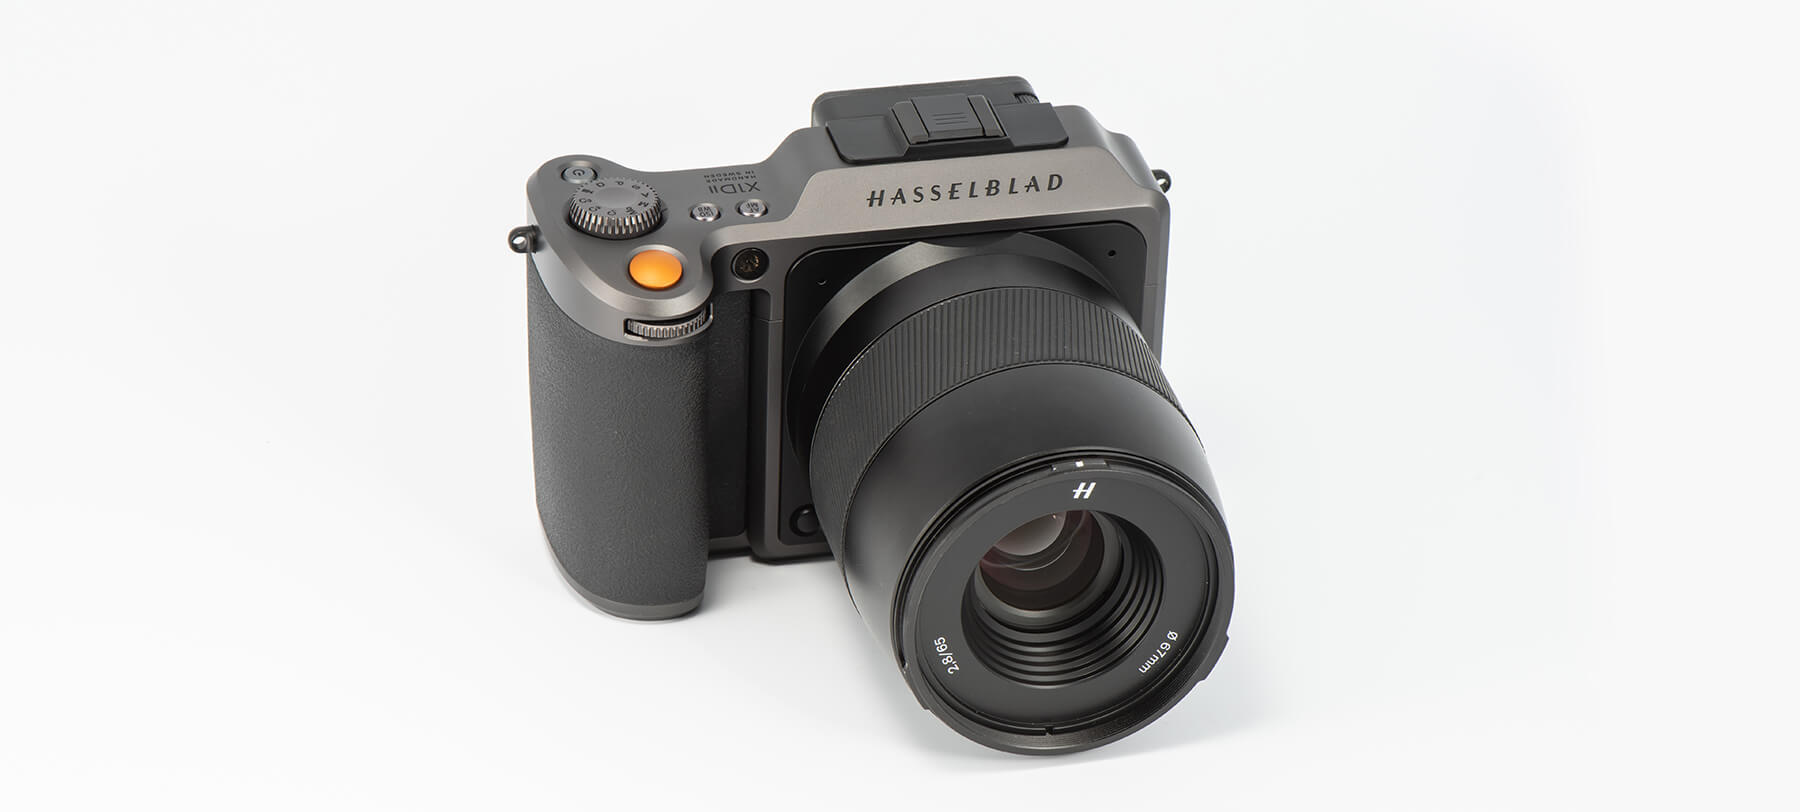 Hasselblad X1d Ii 50c Test Real Character Real Quality Photography News